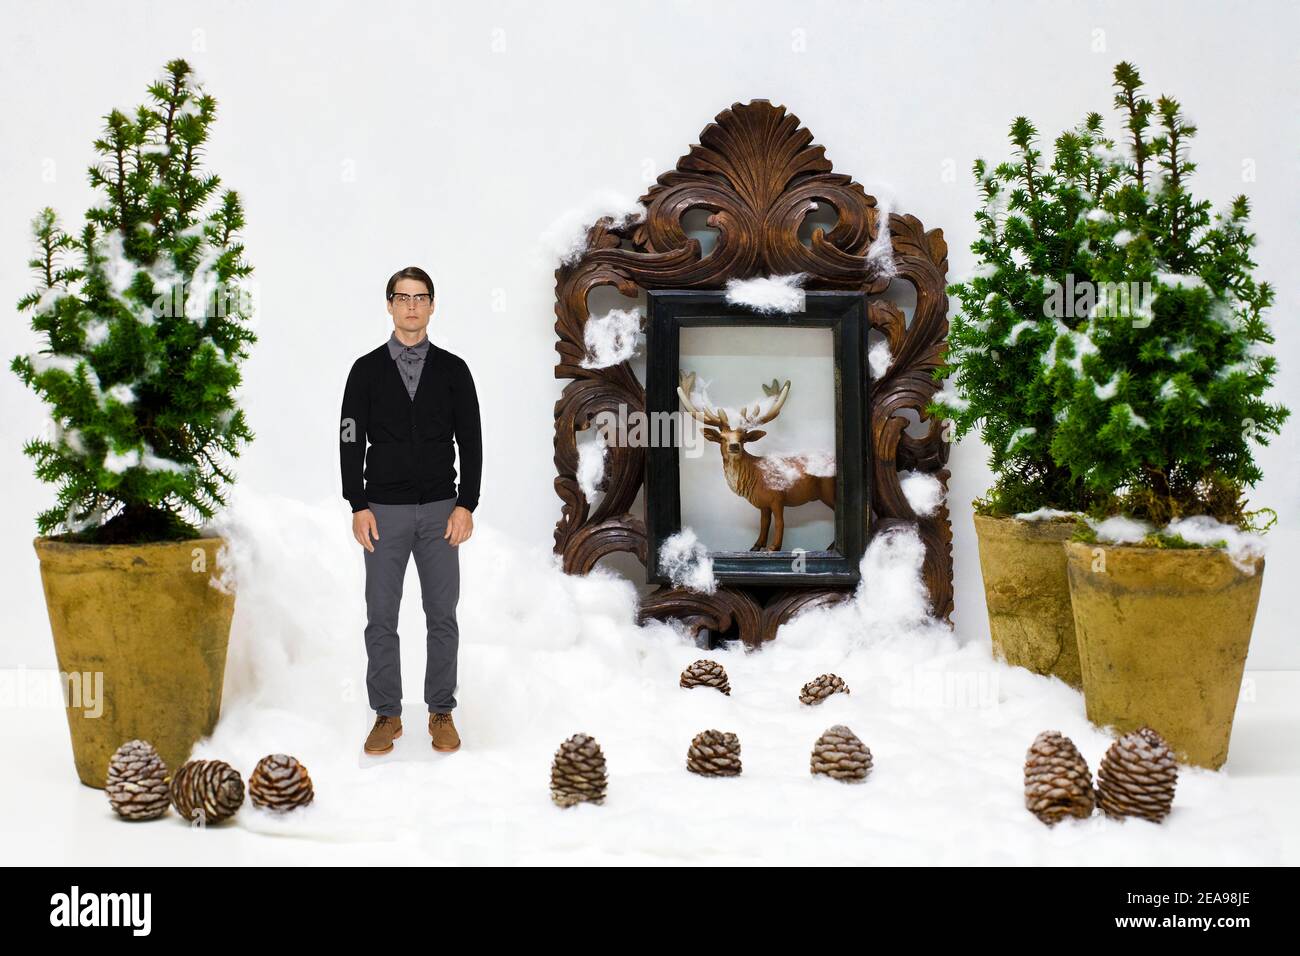 Man, toy figure, deer, picture frame, pine cones, cotton wool, snow, flower pots, Christmas, tree, white, standing, cut-out figure Stock Photo